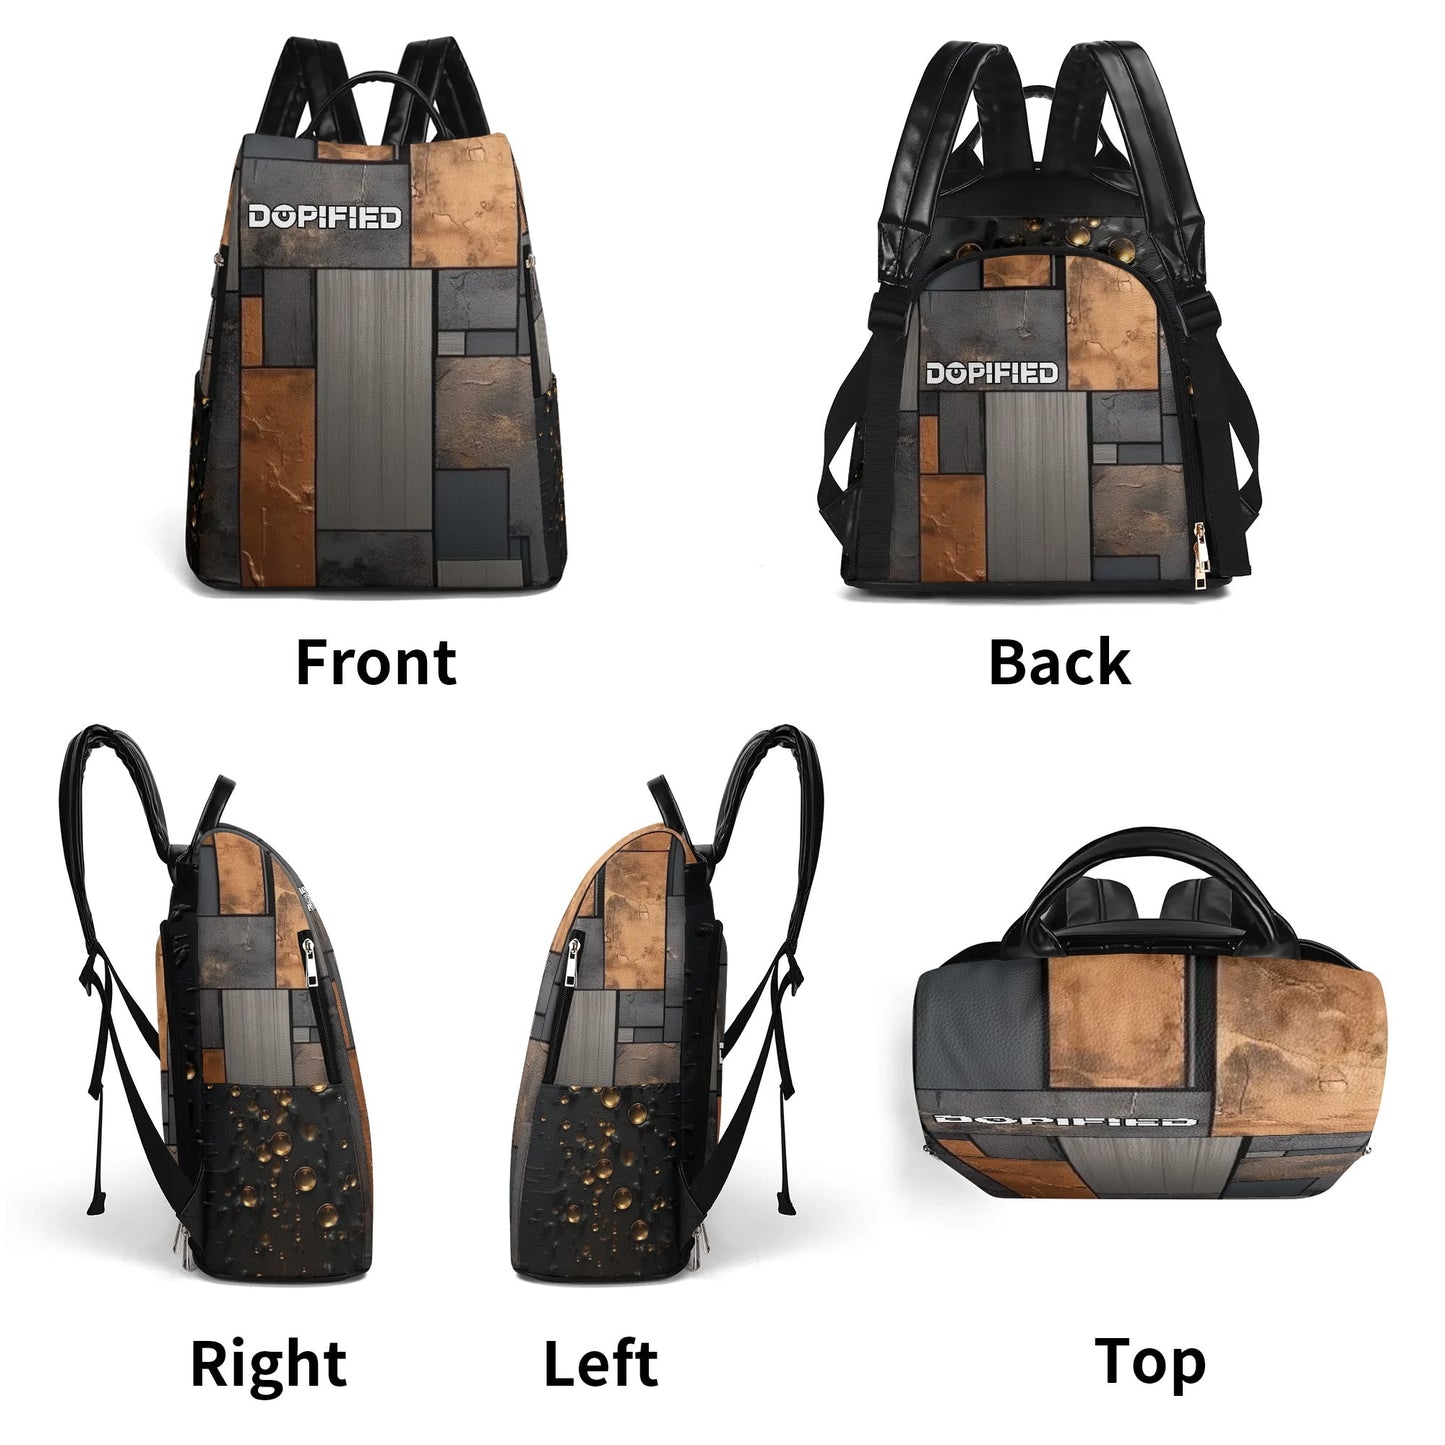 DOPiFiED Metric Travel PU Daypack Anti-theft Backpack